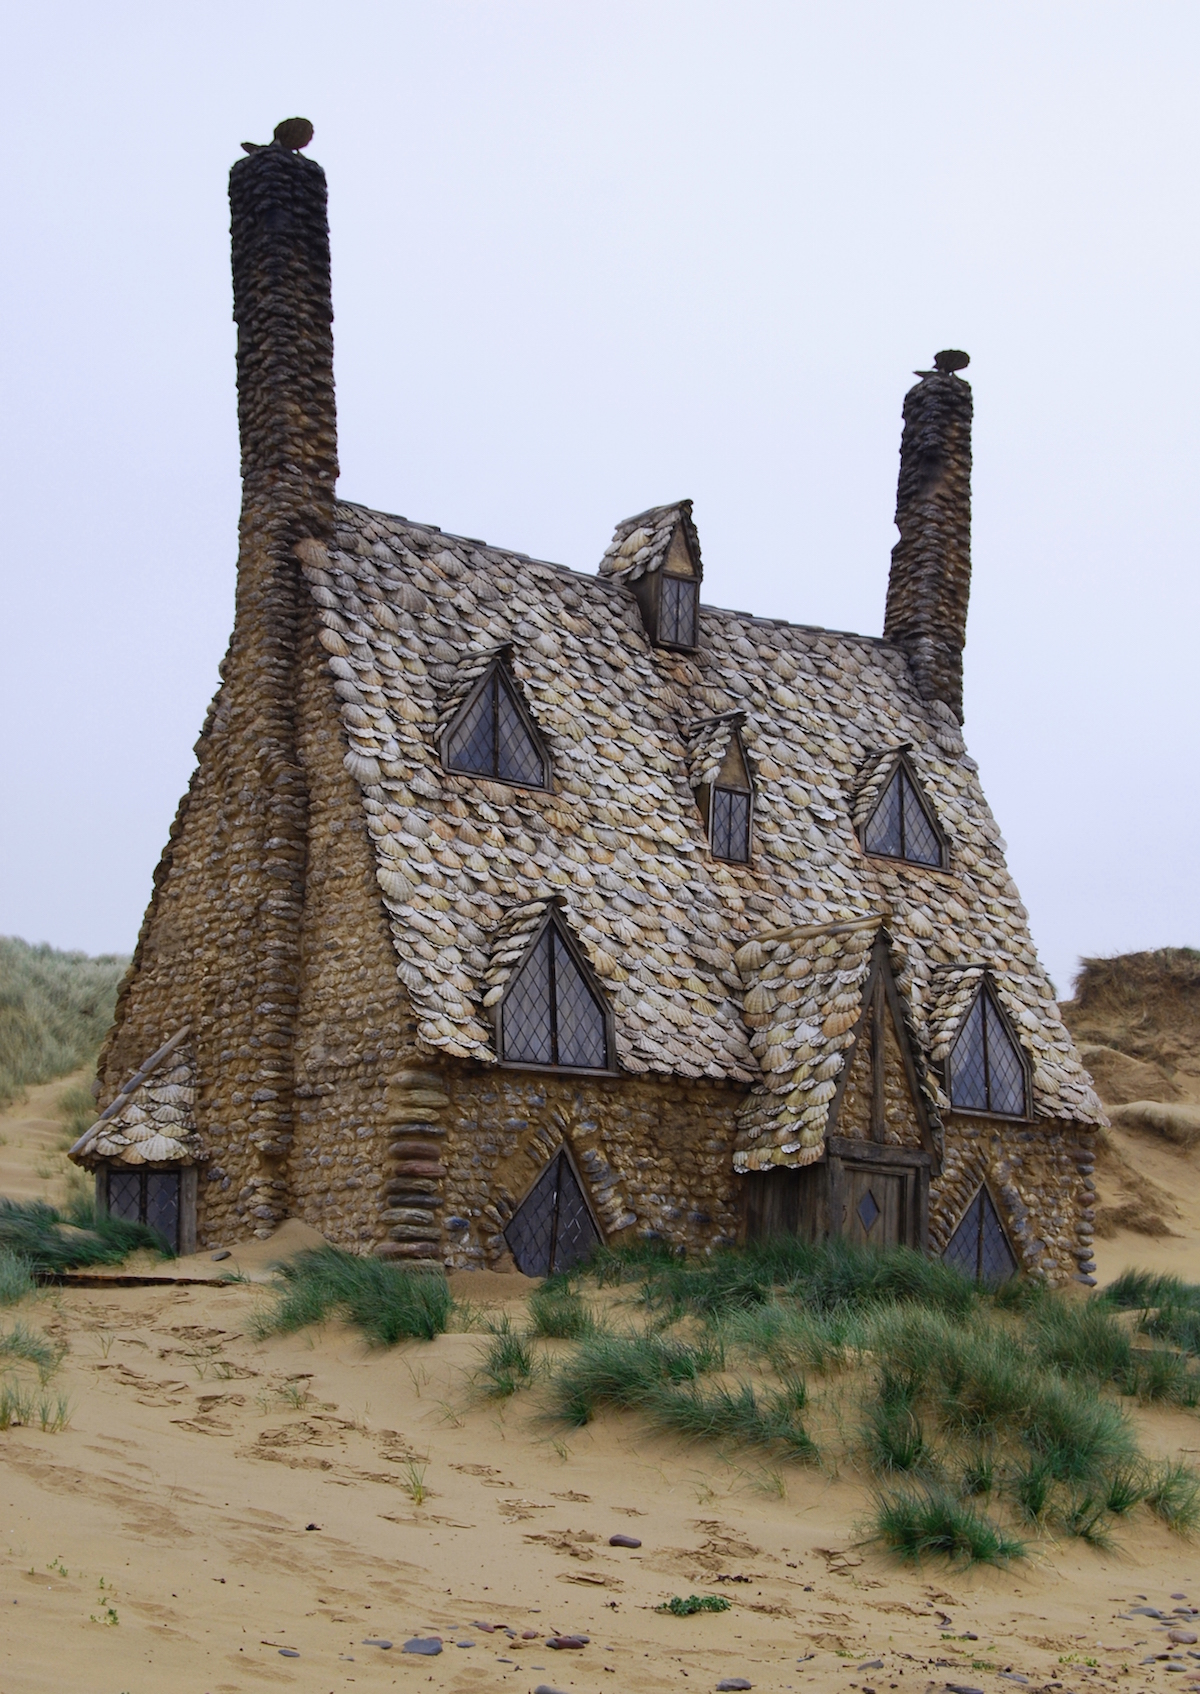 The quirky Harry Potter seashell hut actually existsed!